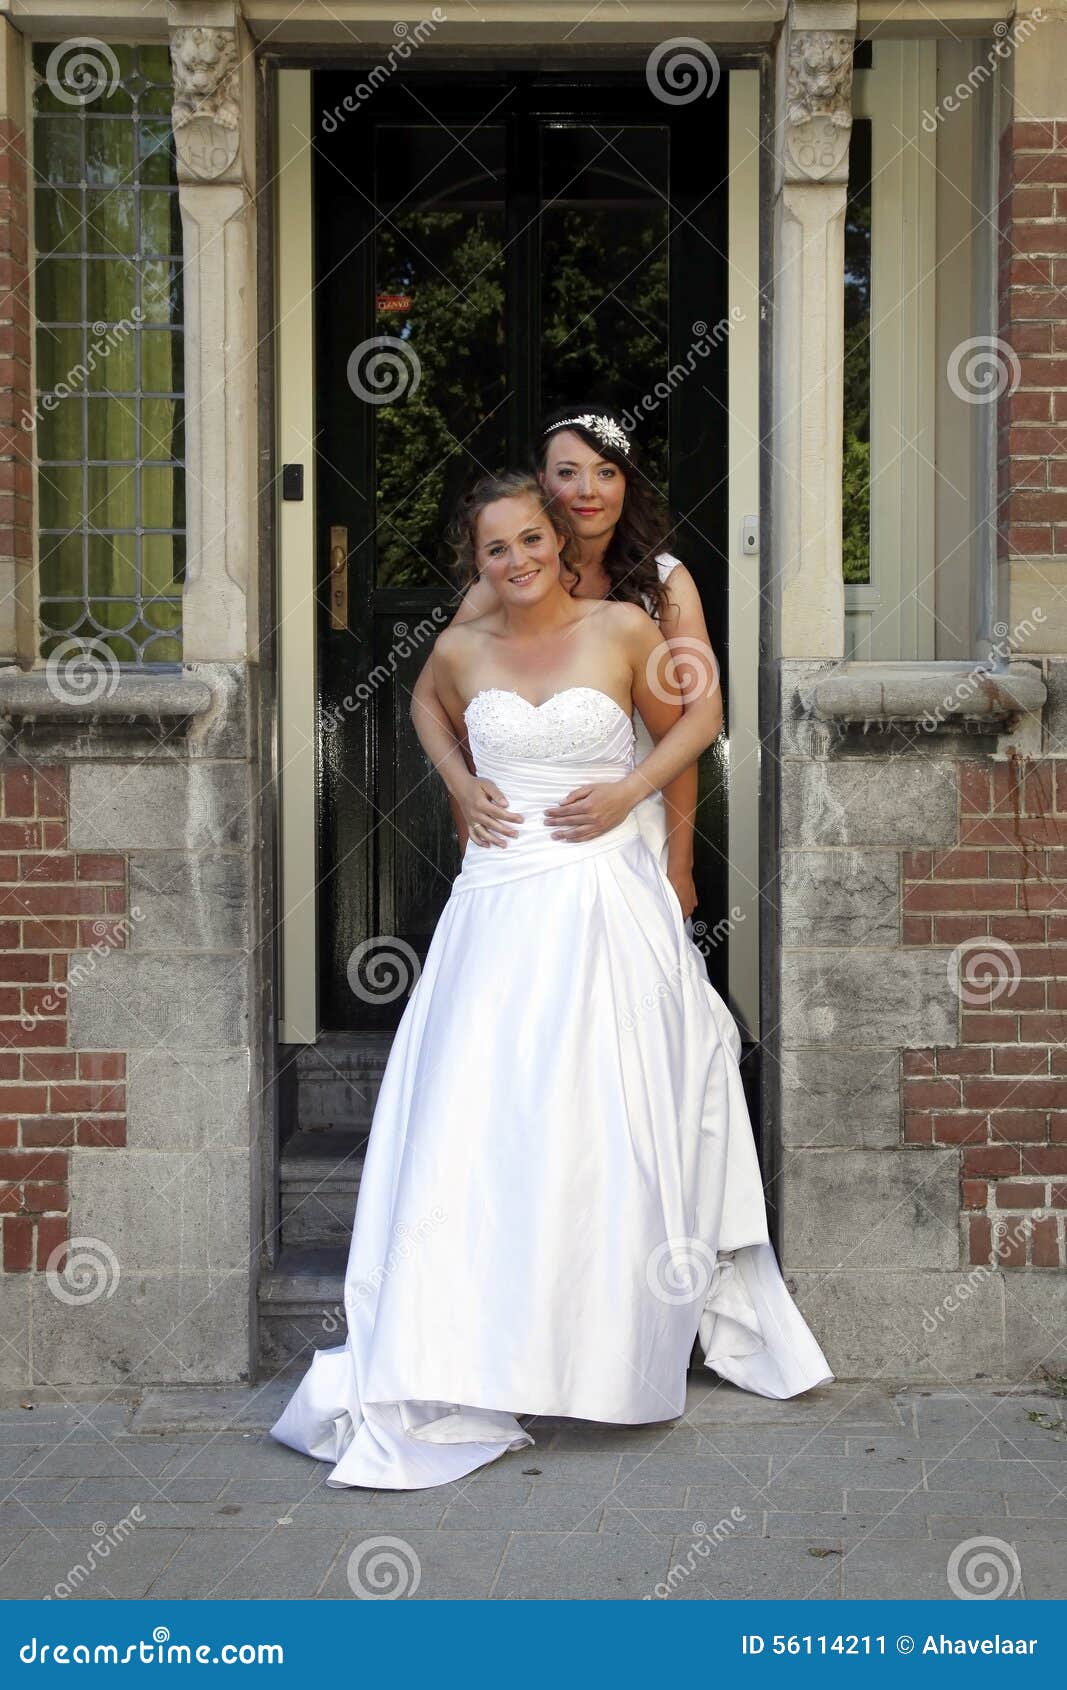 Just Married Lesbian Pair On Doorstep Of Old City Hall